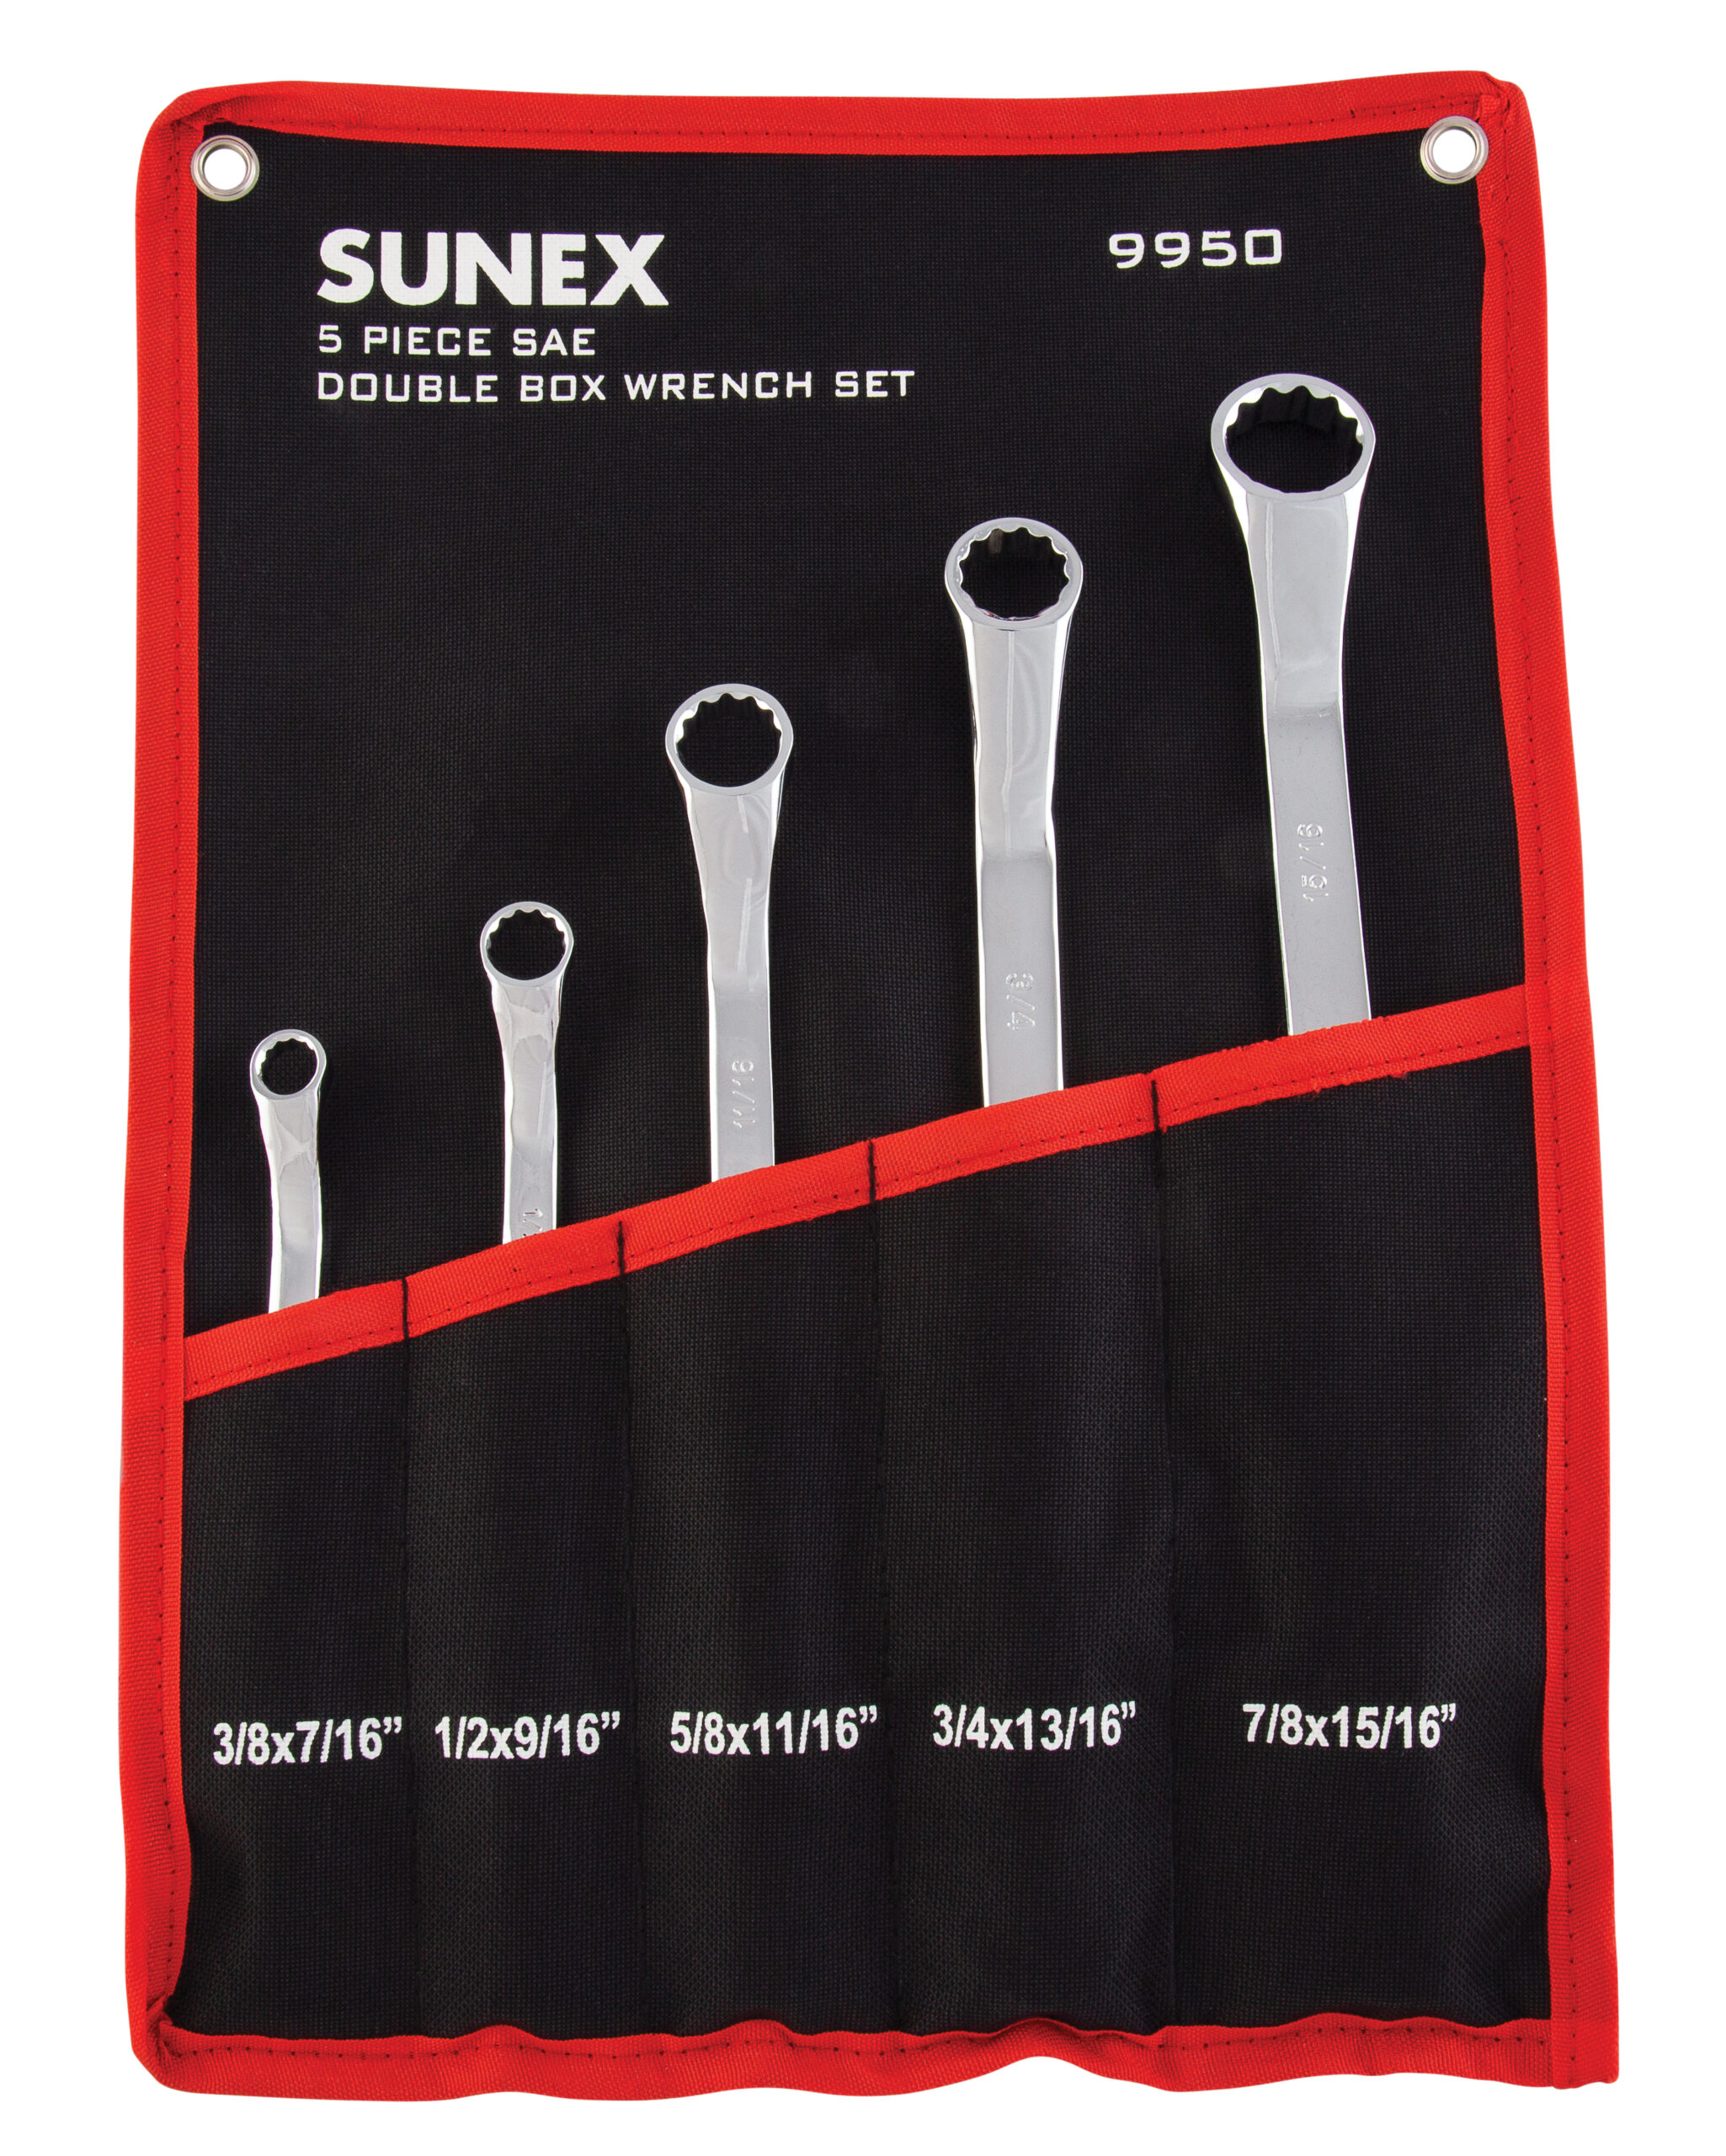 5 PIECE SAE DOUBLE BOX WRENCH SET